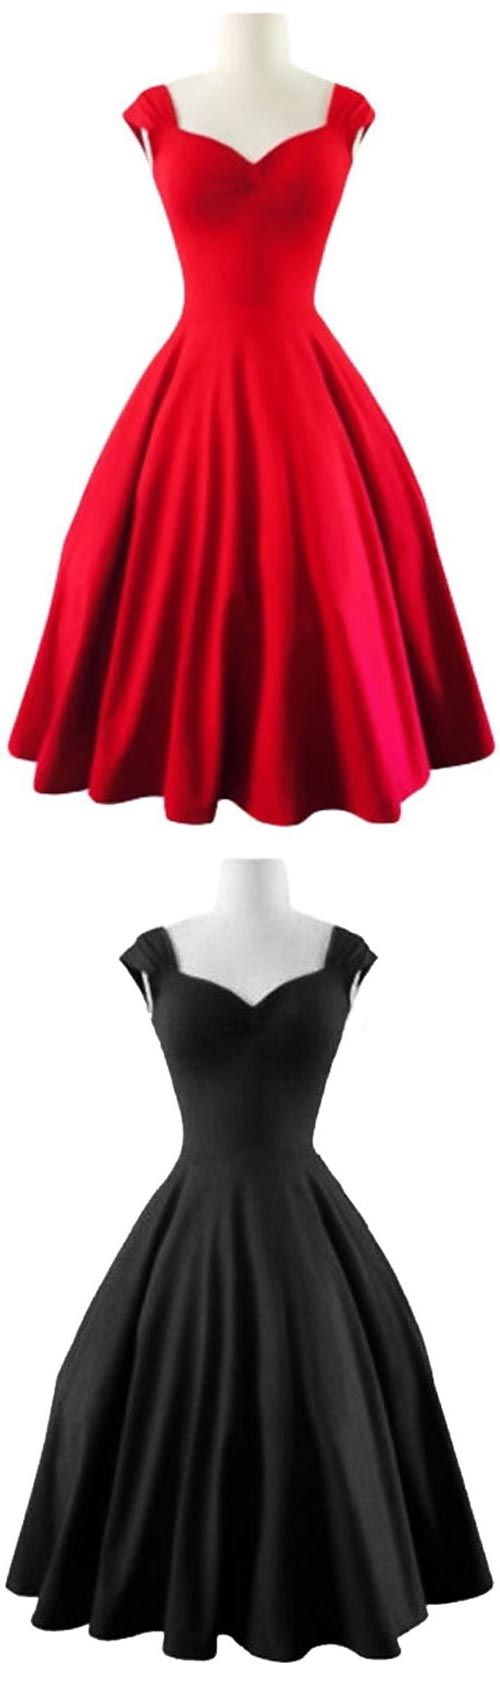 Vintage Homecoming Dress,cute Homecoming Dress,chic Fashion Homecoming Dress,short Prom Dress,red Homecoming Gowns, Sweet 16 Dress